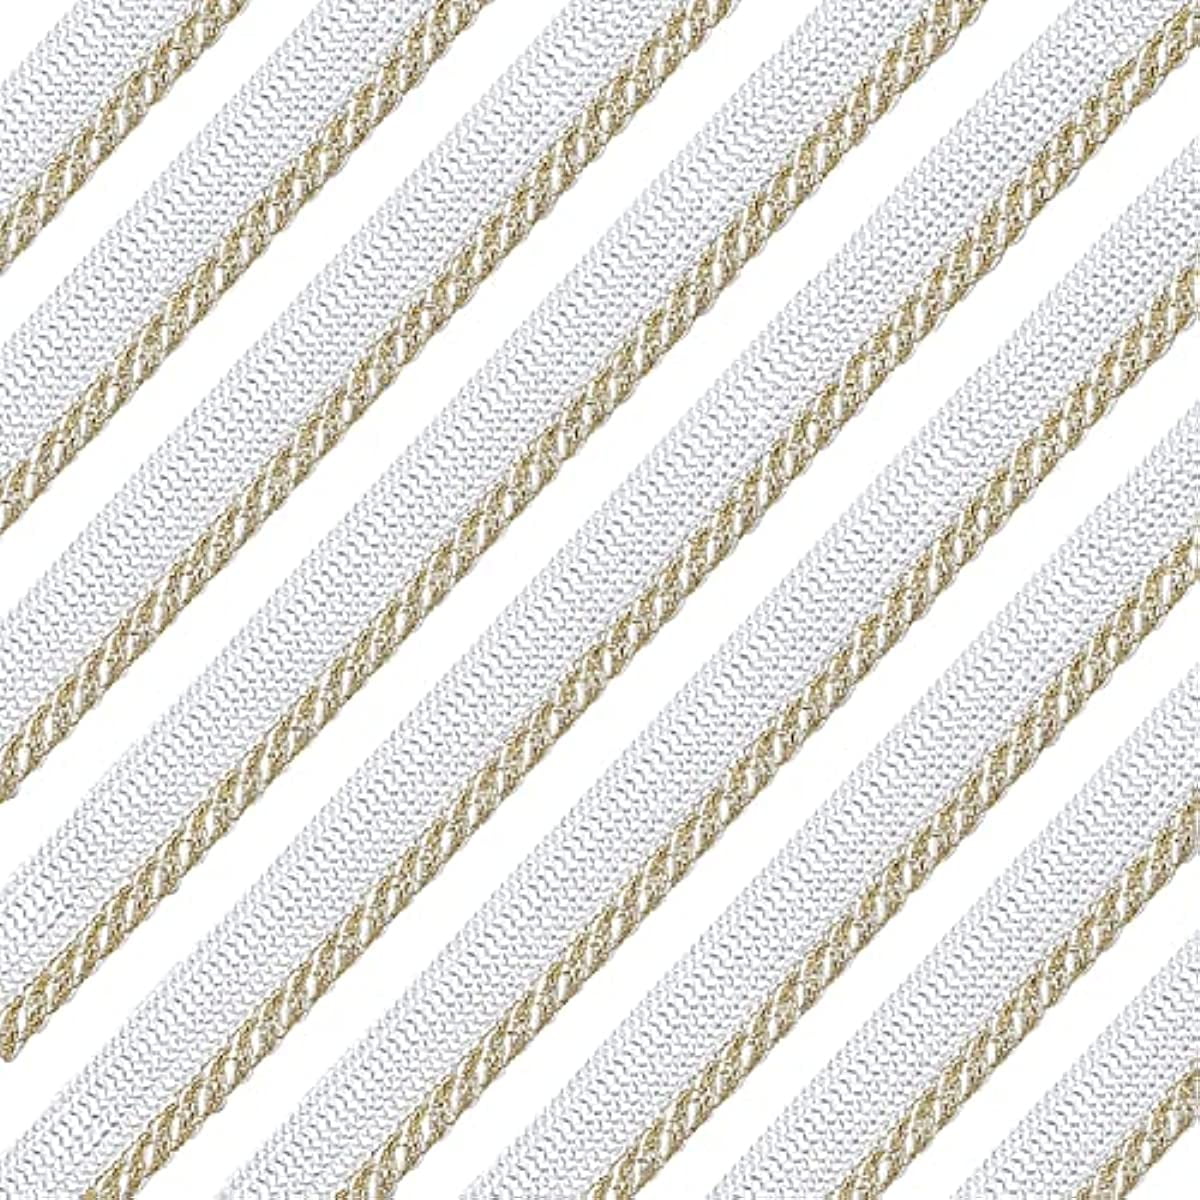 Silver and Gold Nylon Twisted Cord Trim Rope for Crafts (36 Yards, 2 Pack)